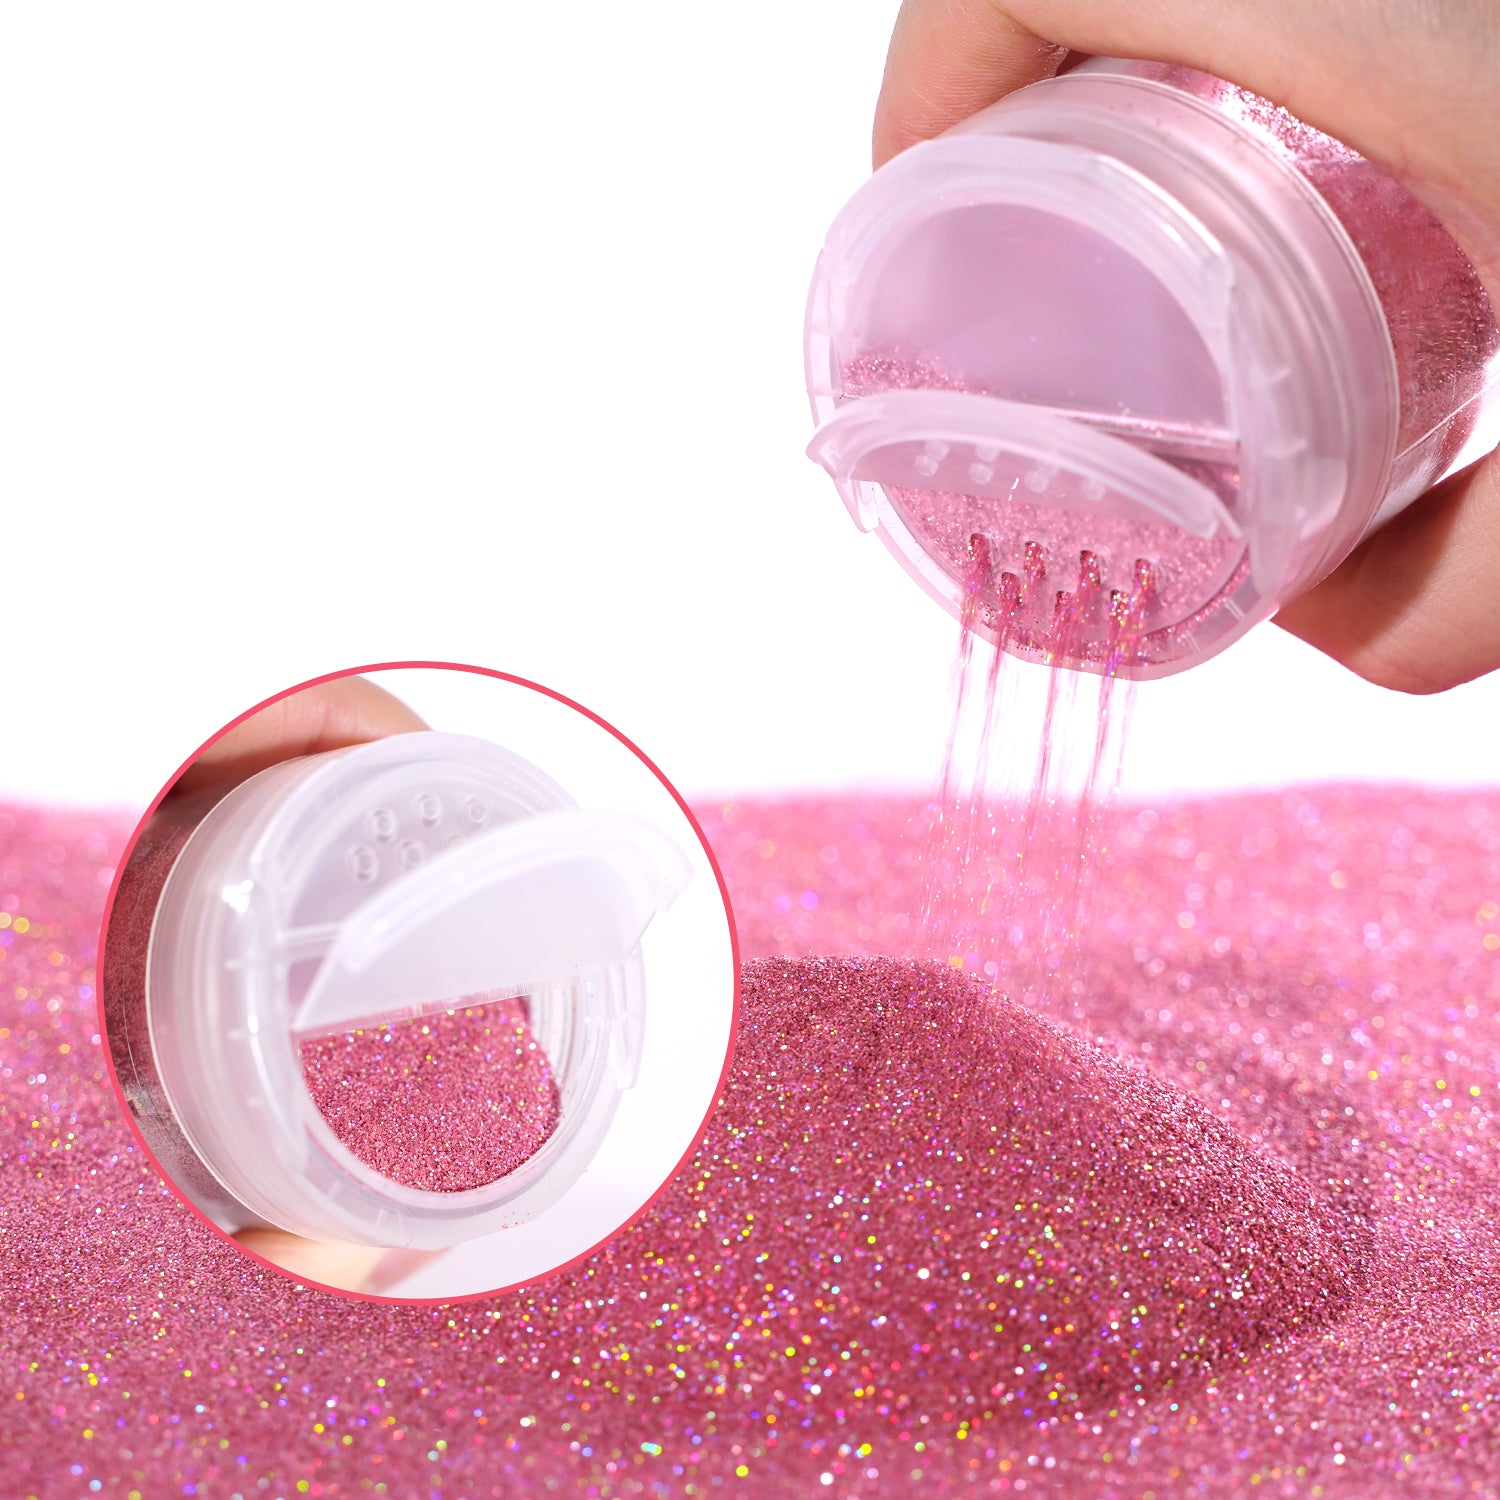 Lrisy Holographic Extra Fine Neon Punk Glitter Powder with Shaker Lid 140g/4.5oz (Holographic Hazy Pink)